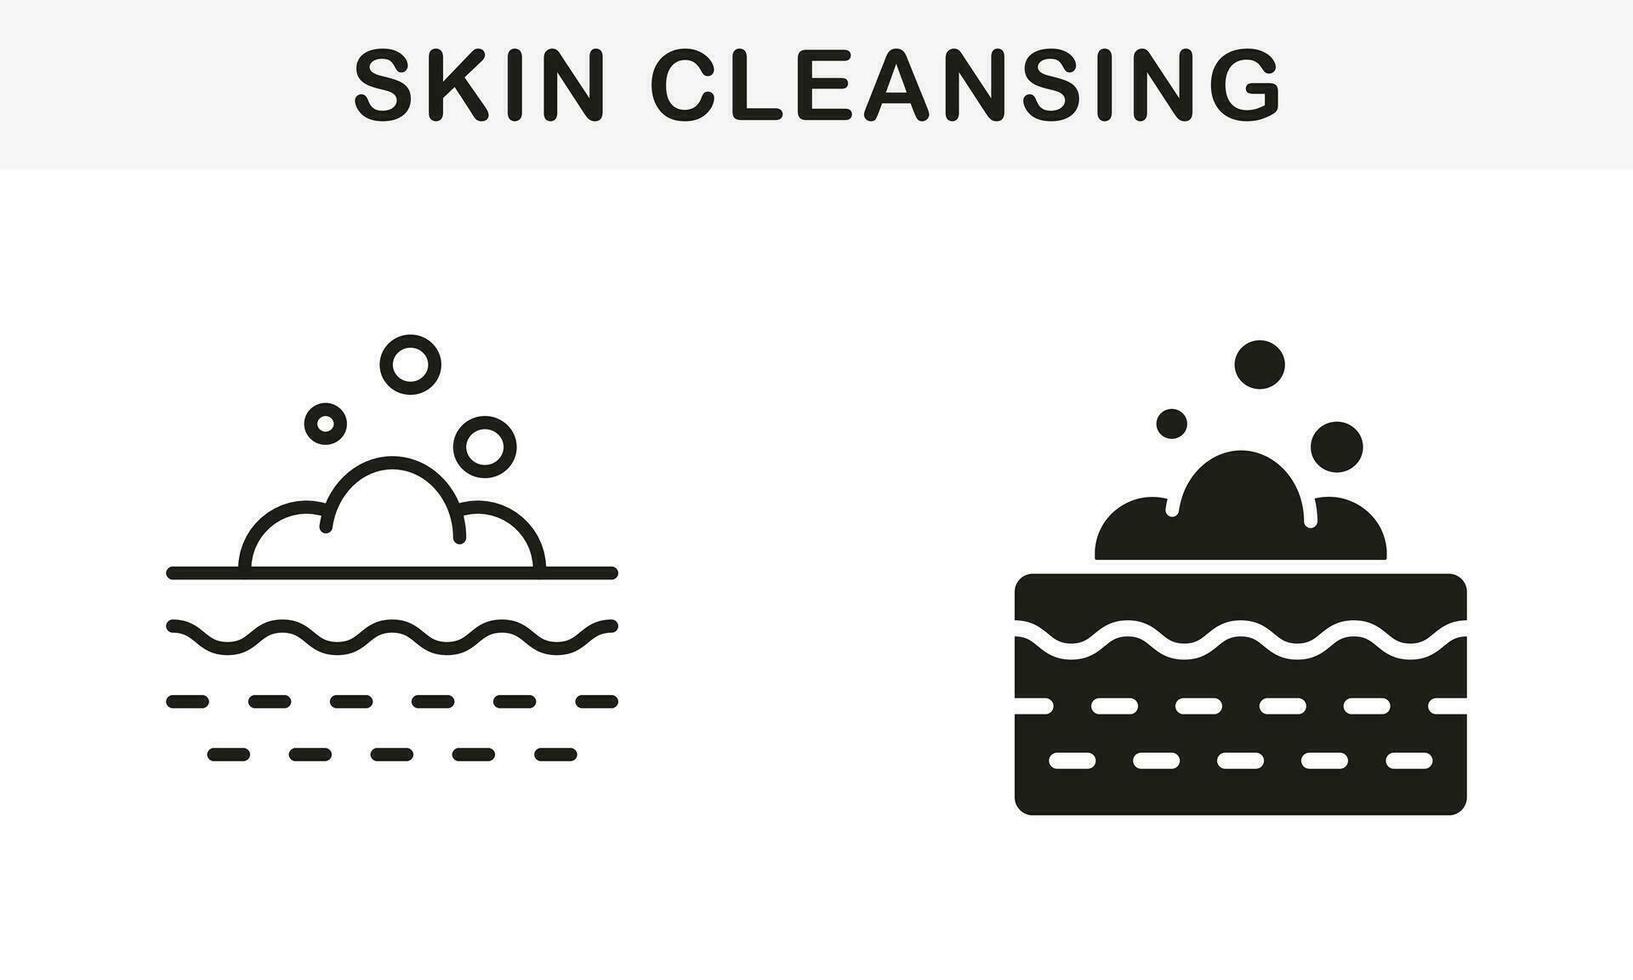 Skin Cosmetic Procedure Symbol Collection. Cream, Gel, Shampoo, Mousse on Face, Body Skin Pictogram. Foam Bubble on Skin for Deep Cleansing Line and Silhouette Icon Set. Isolated Vector Illustration.